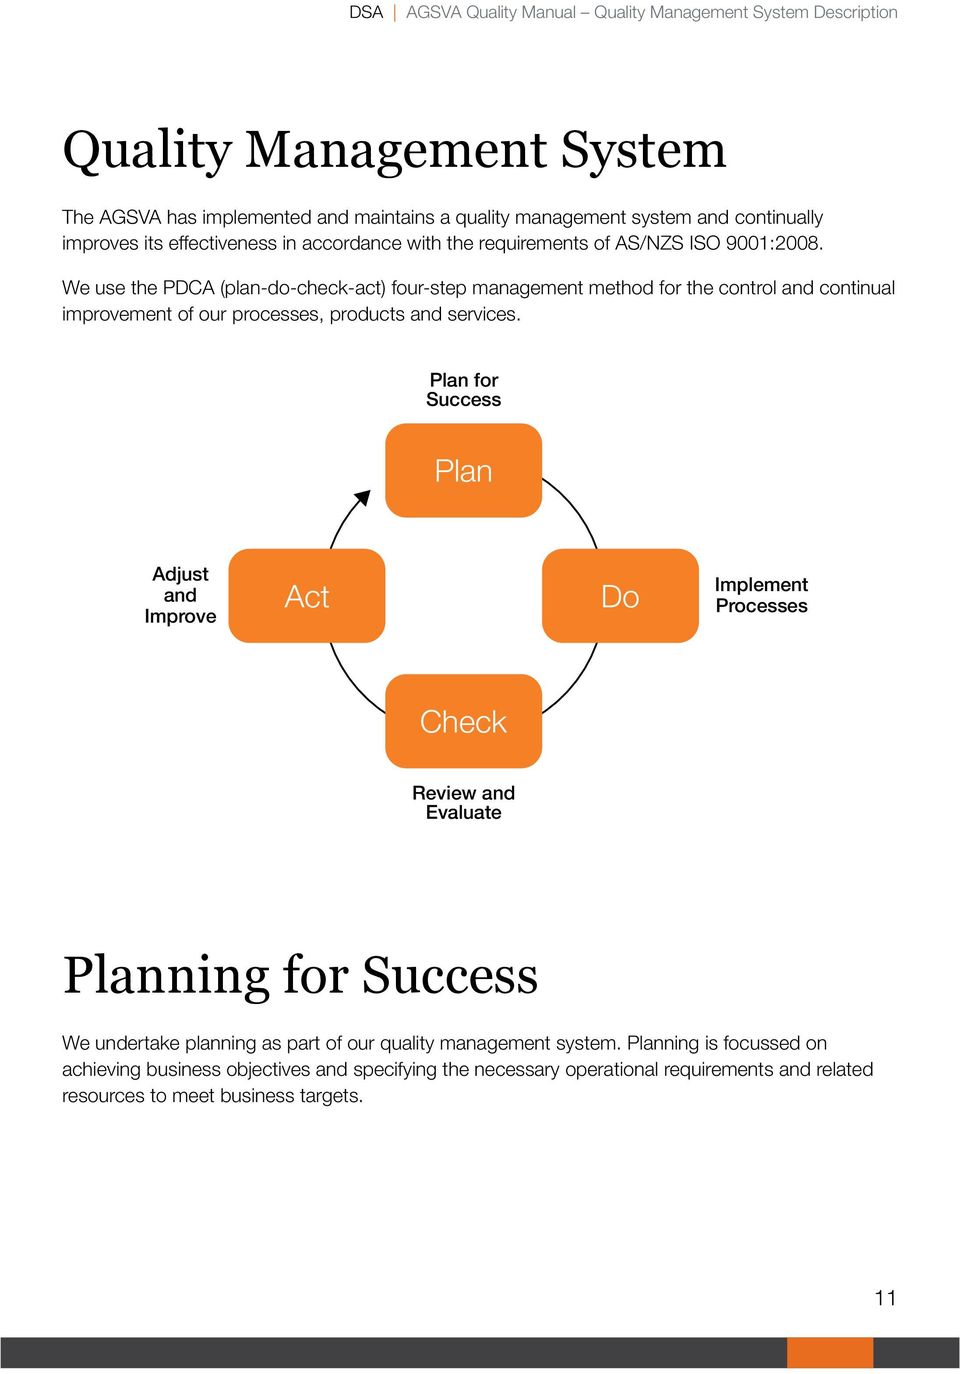 We use the PDCA (plan-do-check-act) four-step management method for the control and continual improvement of our processes, products and services.